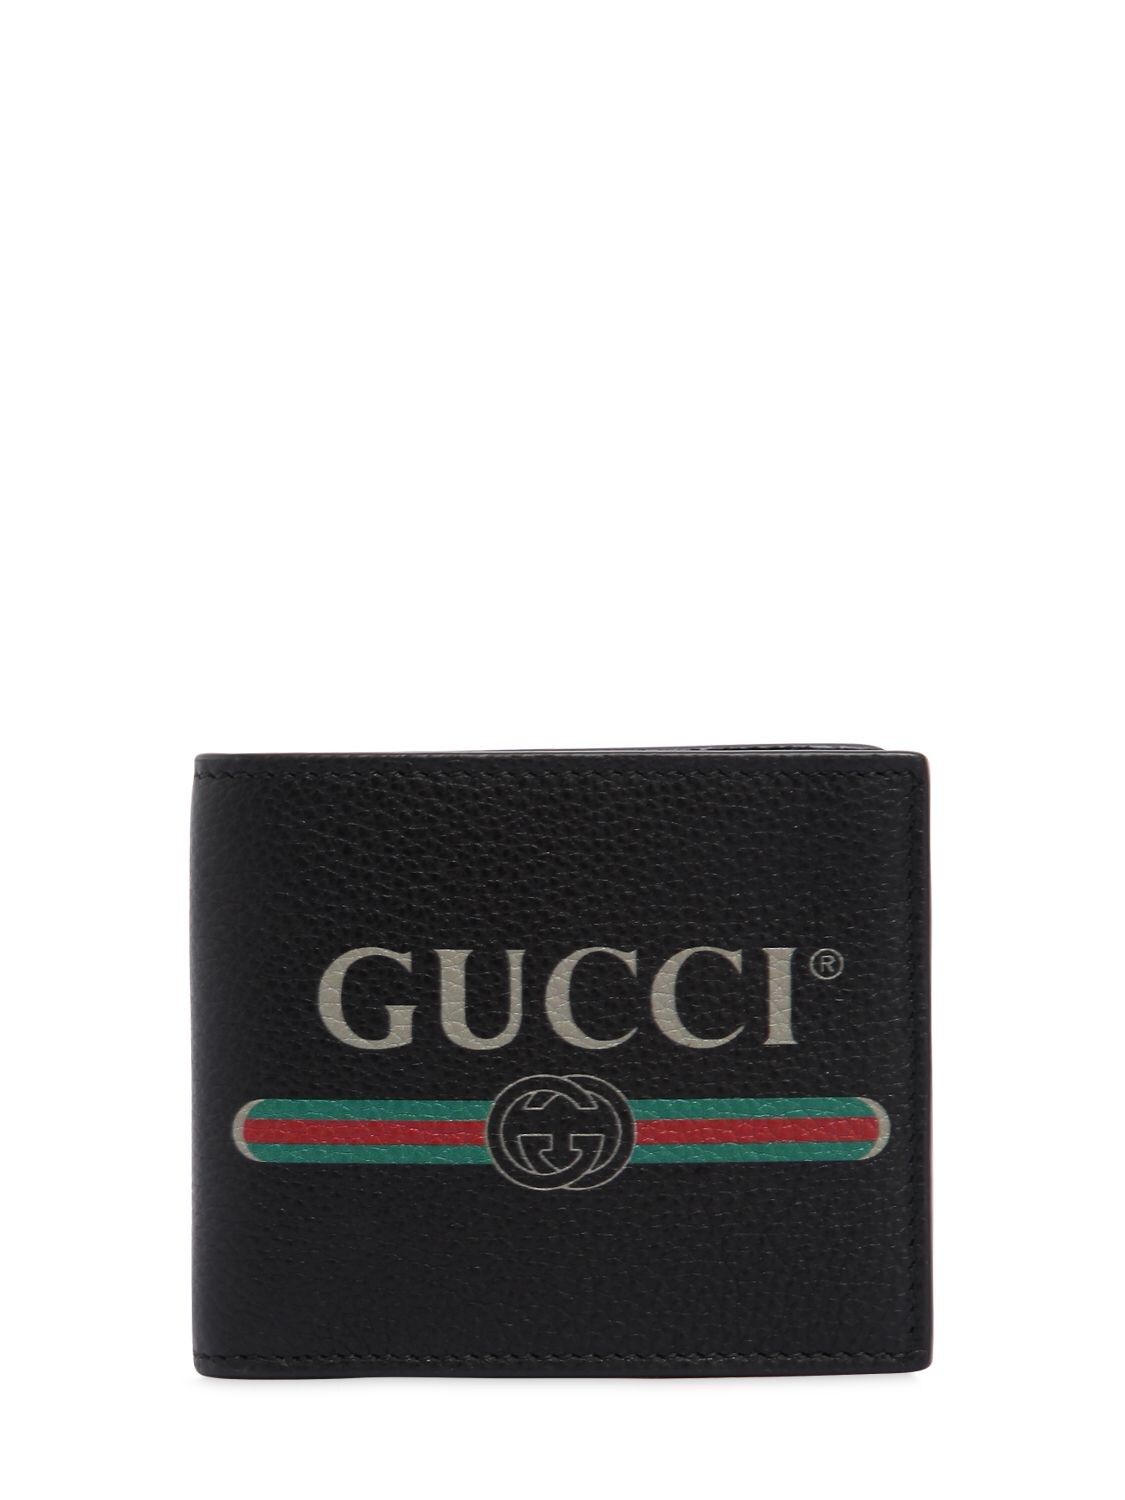 GUCCI GUCCI 1980'S PRINTED LEATHER WALLET,67IH0L020-ODE2Mw2